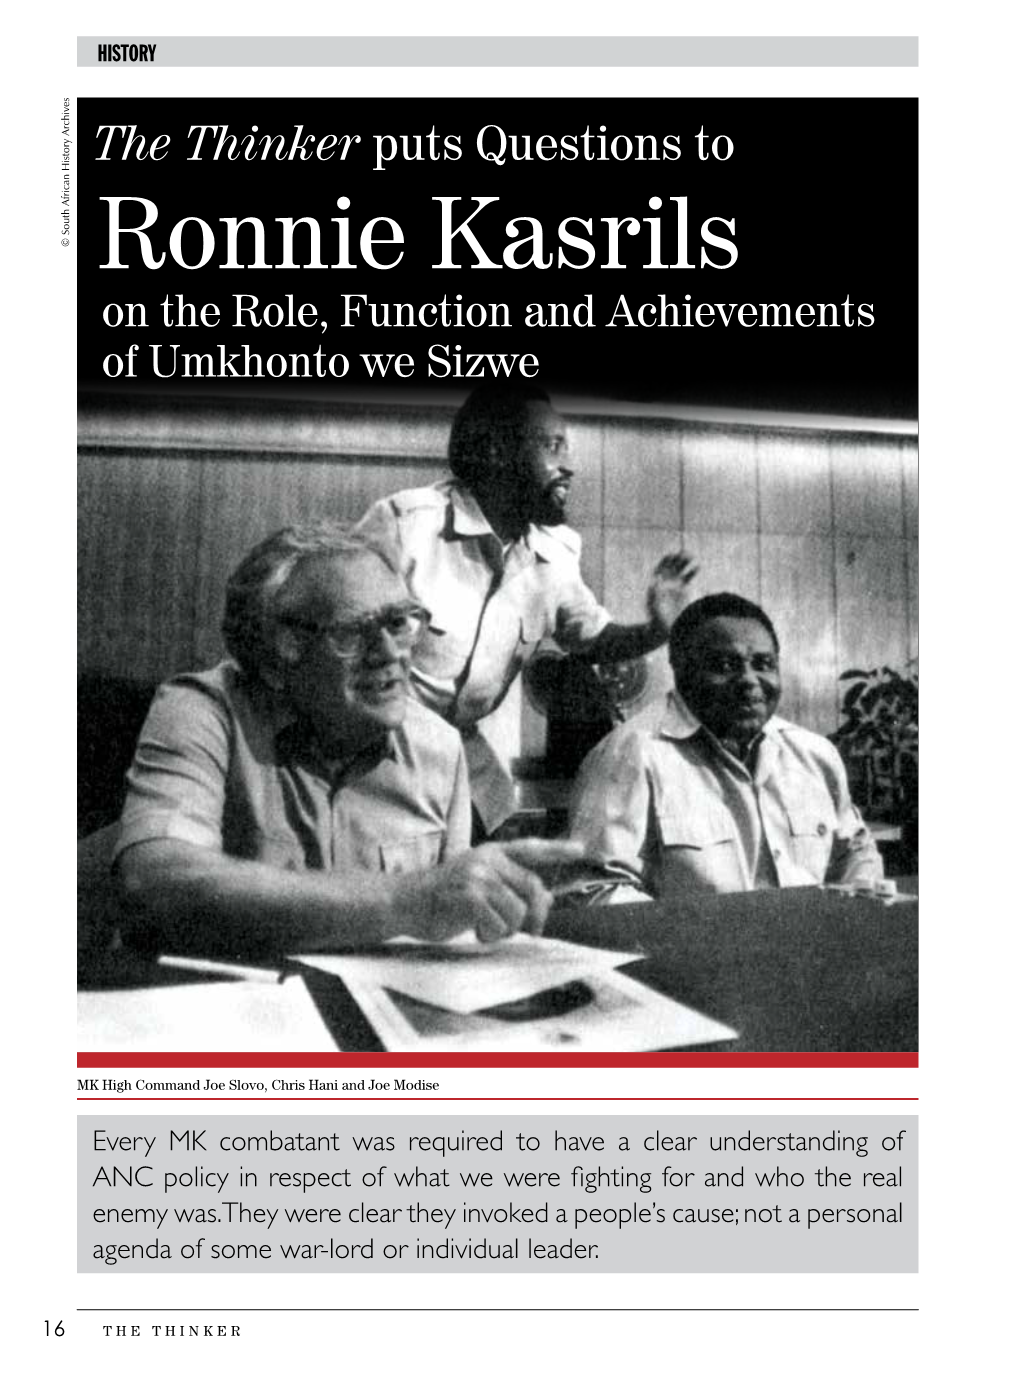 Ronnie Kasrils on the Role, Function and Achievements of Umkhonto We Sizwe